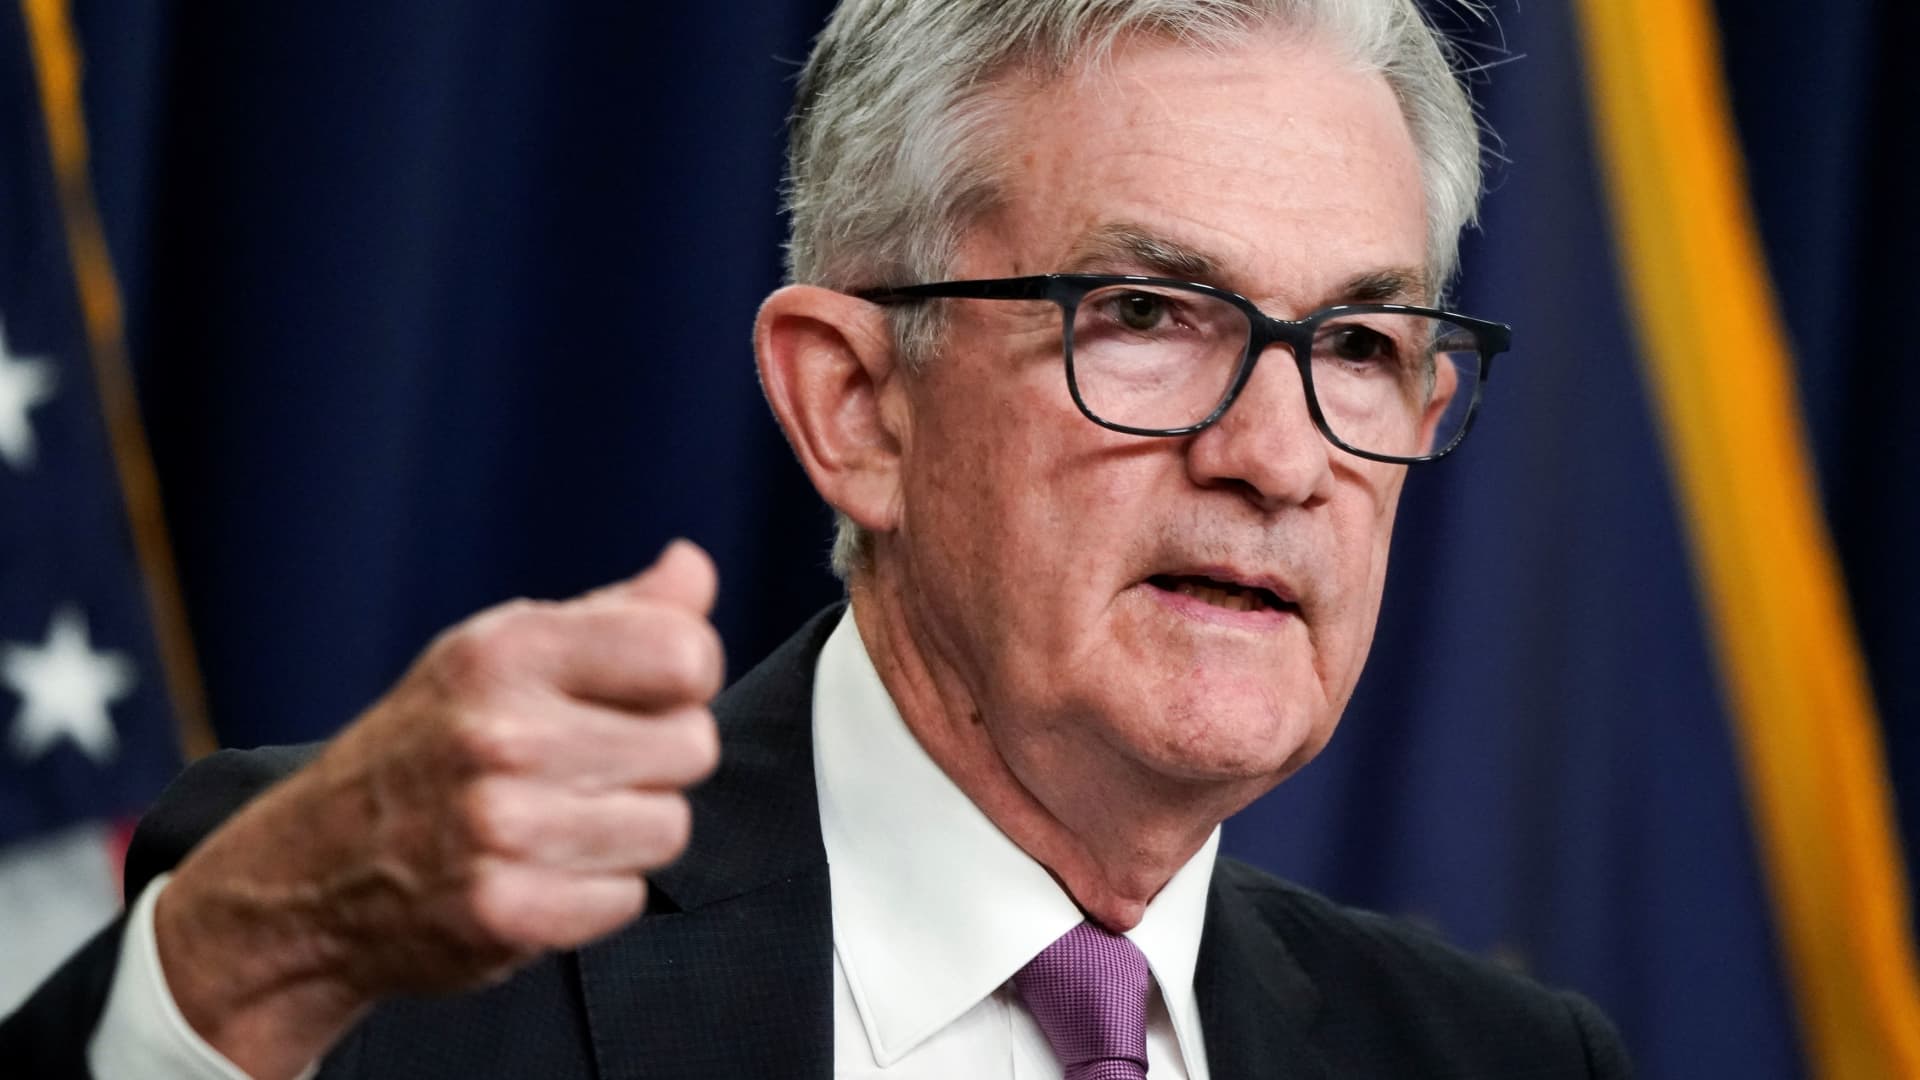 Fed sees interest rate hikes continuing until inflation eases substantially, min..